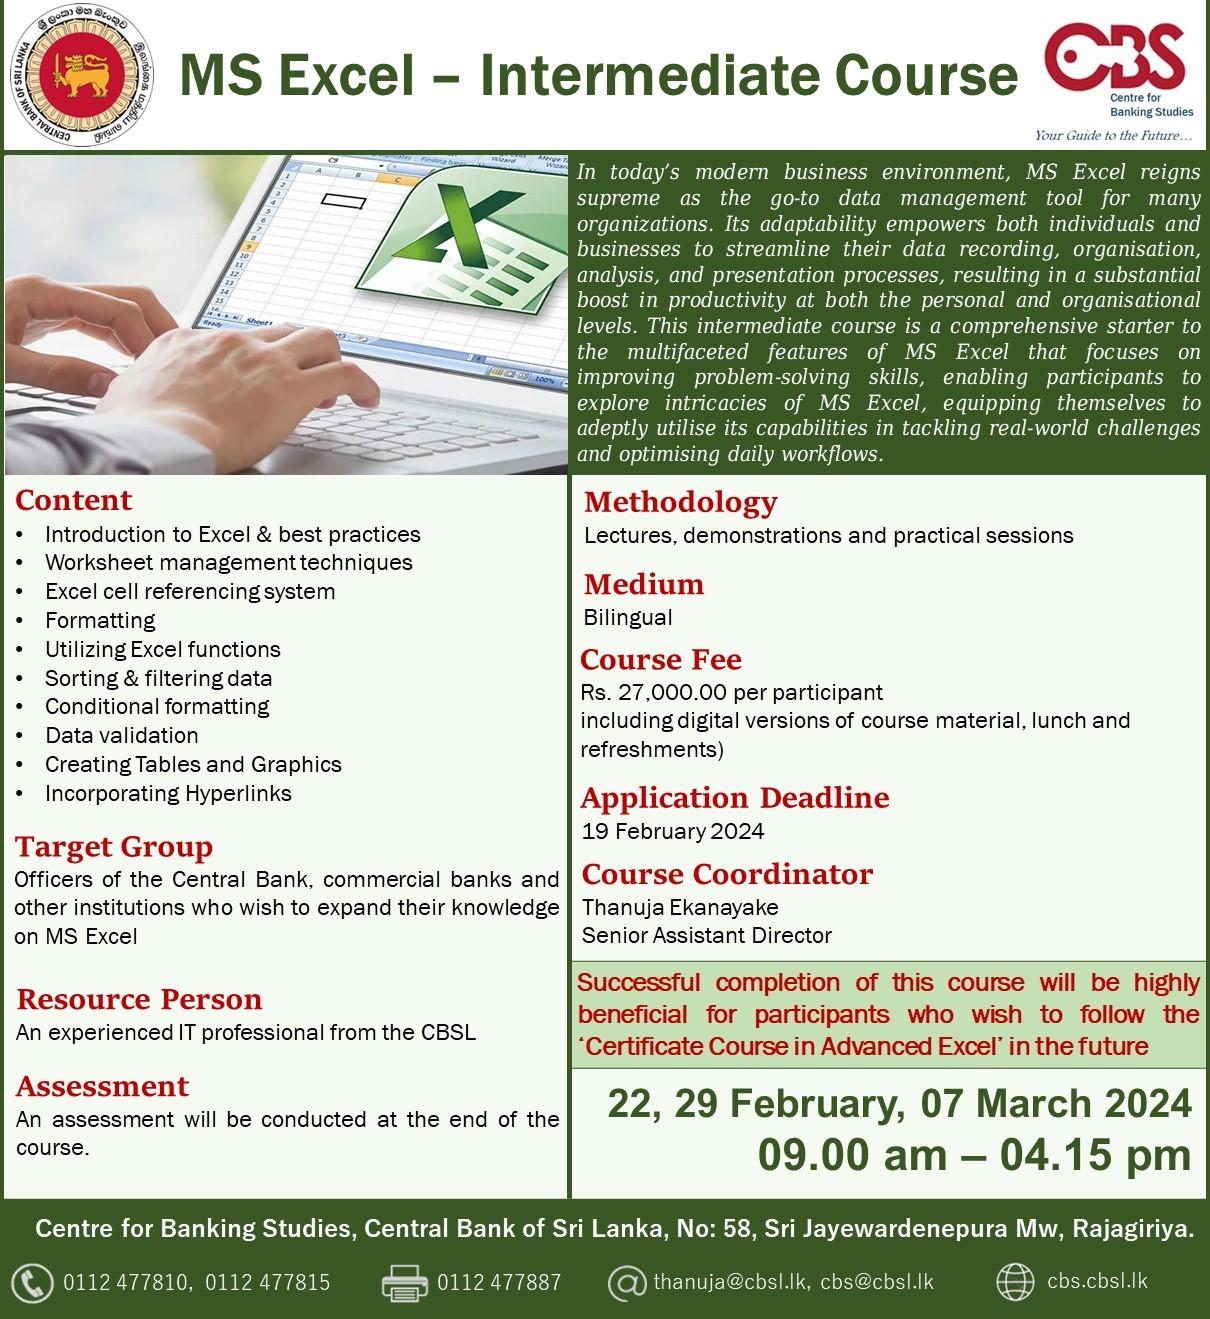 MS Excel - Intermediate Course - 22, 29 February, 07 March 2024